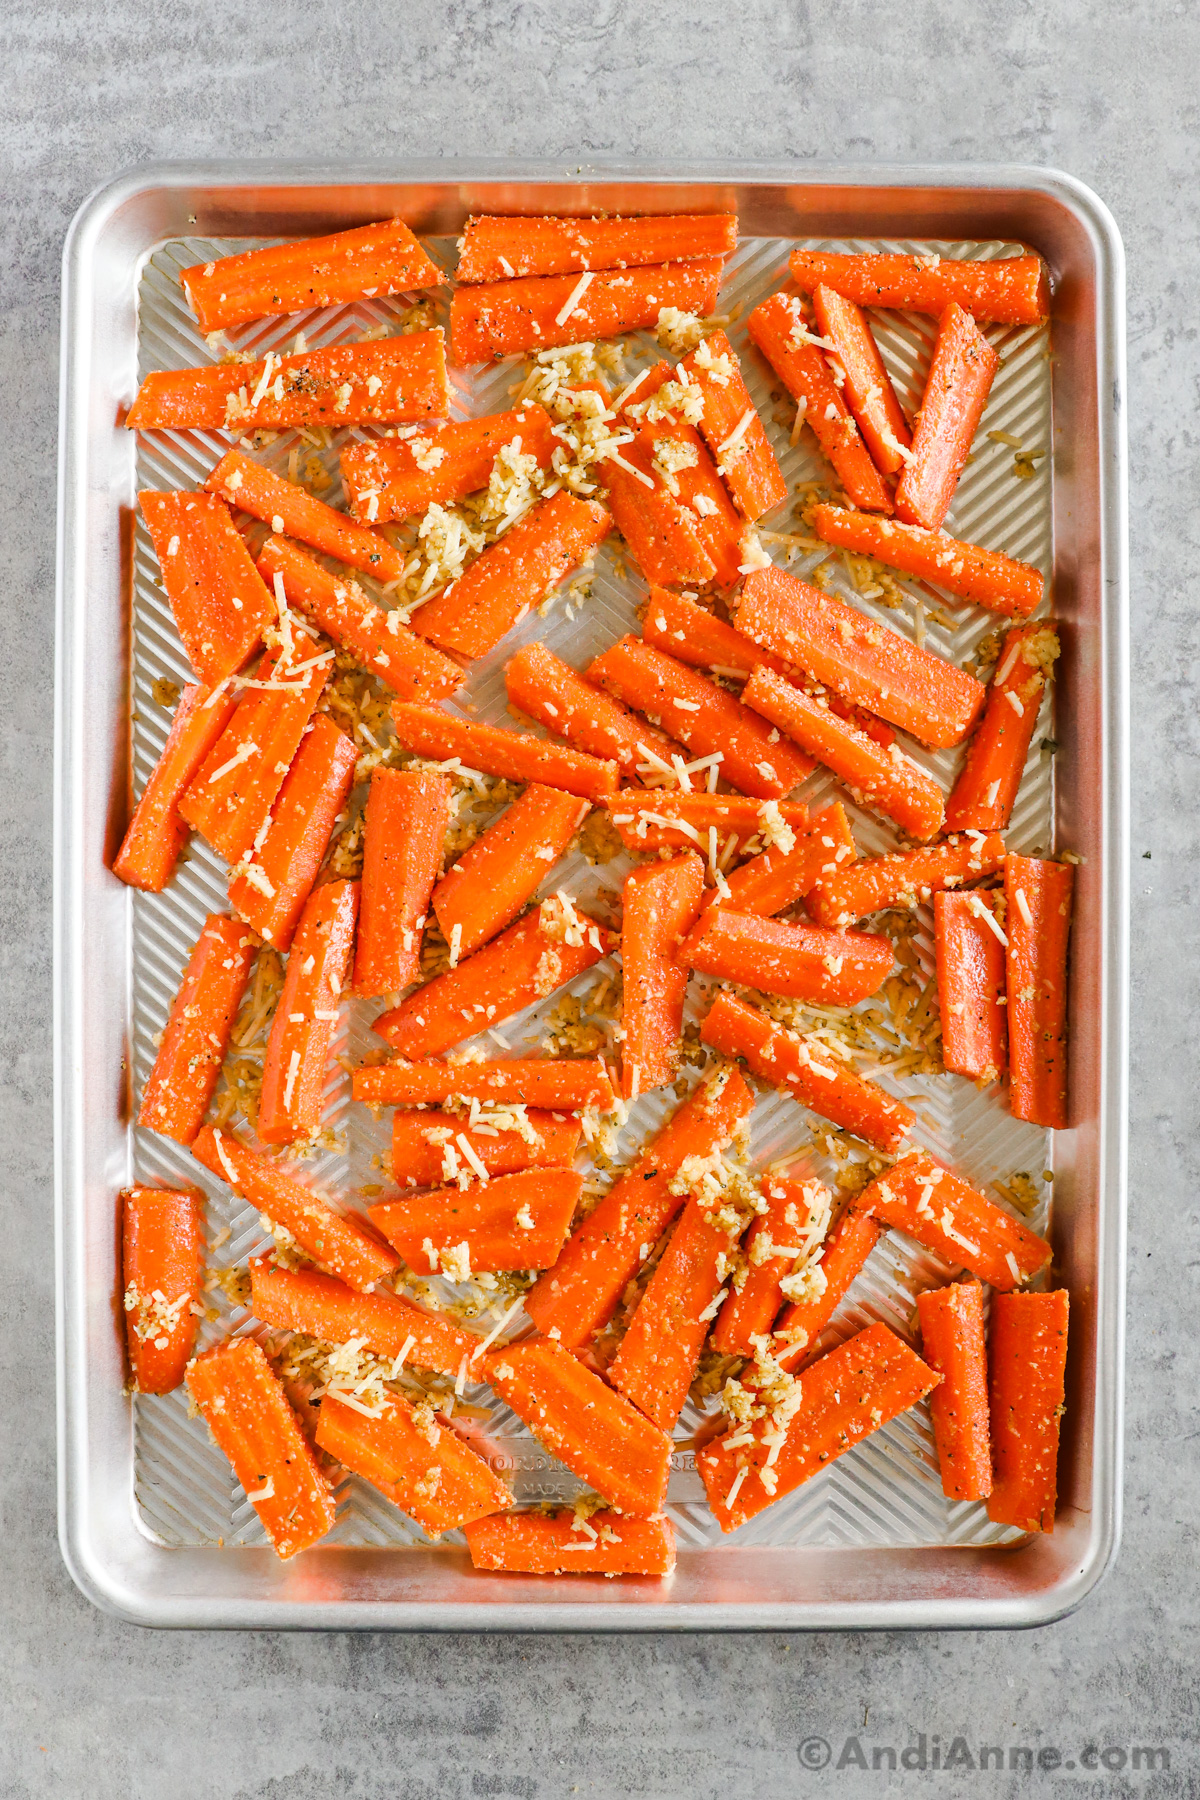 Sliced carrots and parmesan cheese on a baking sheet.